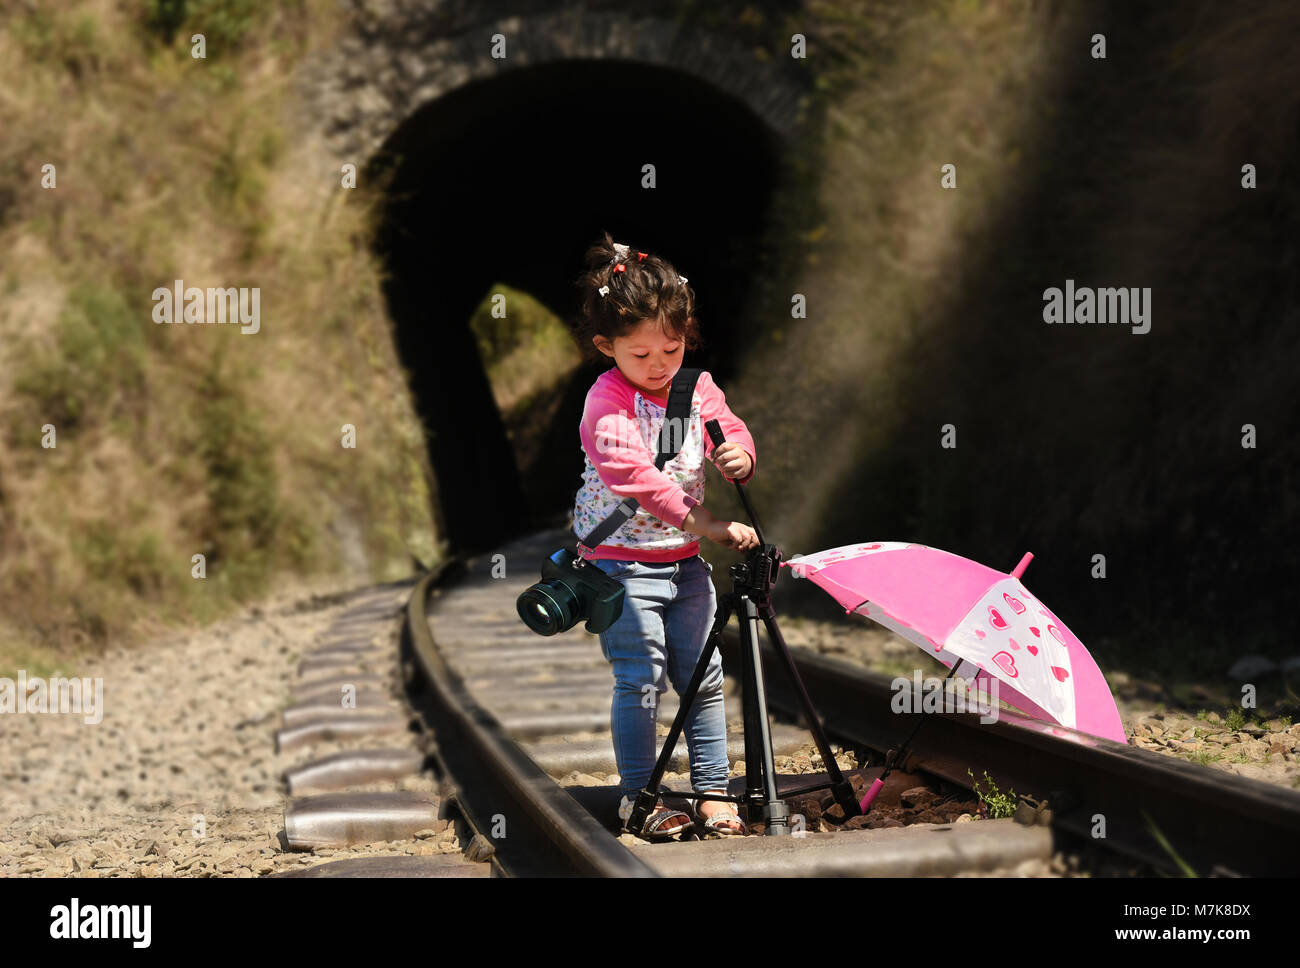 Little girl photographer with tripod and DSLR camera strapped on her shoulder. Stock Photo